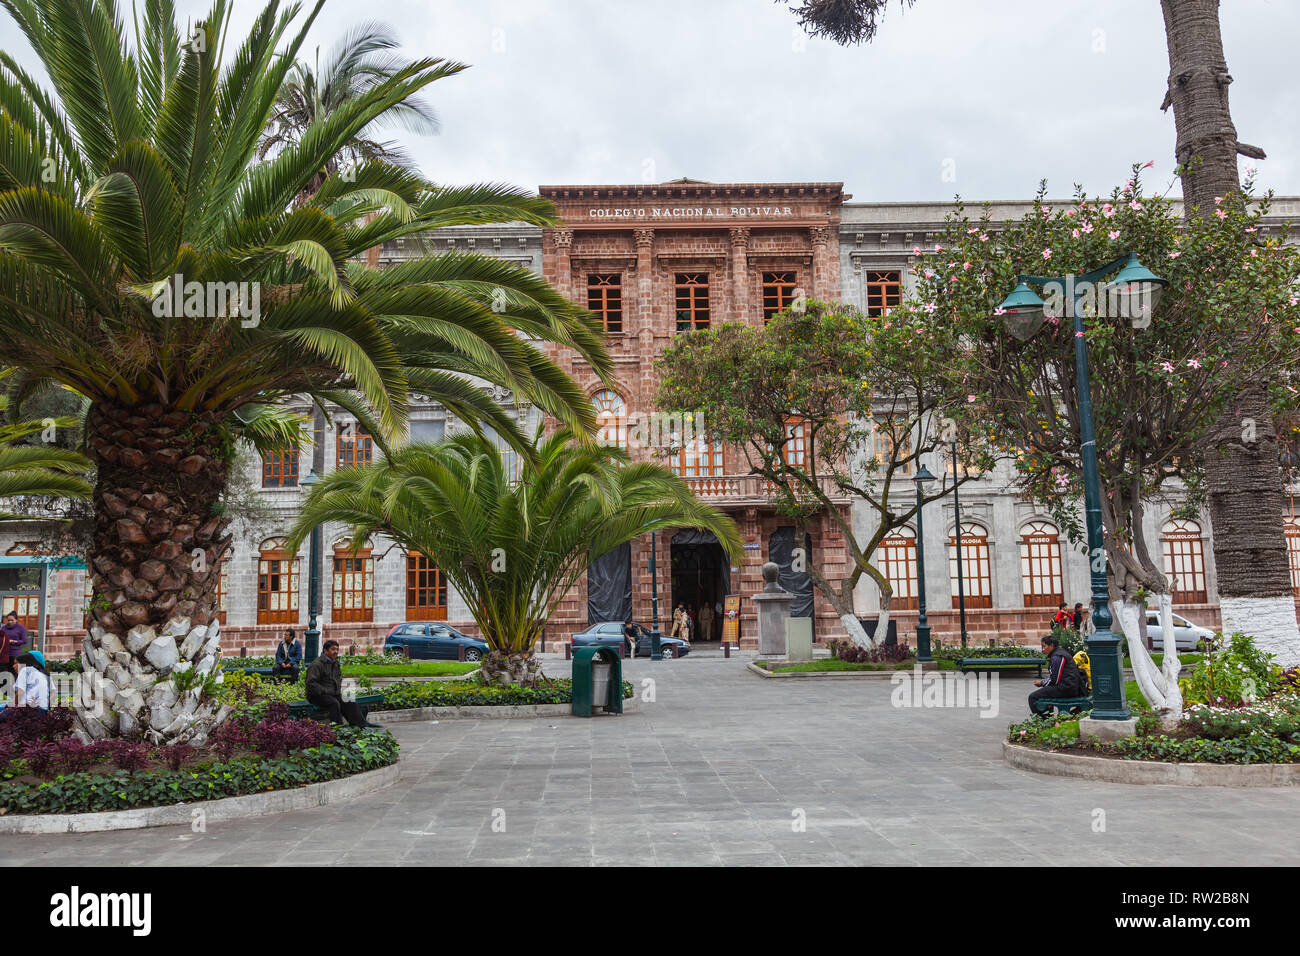 Ambato, Ecuador, April 2018: Colegio Nacional Bolivar, one of the most important in the city of Ambato, with its main facade of brown rock. Stock Photo